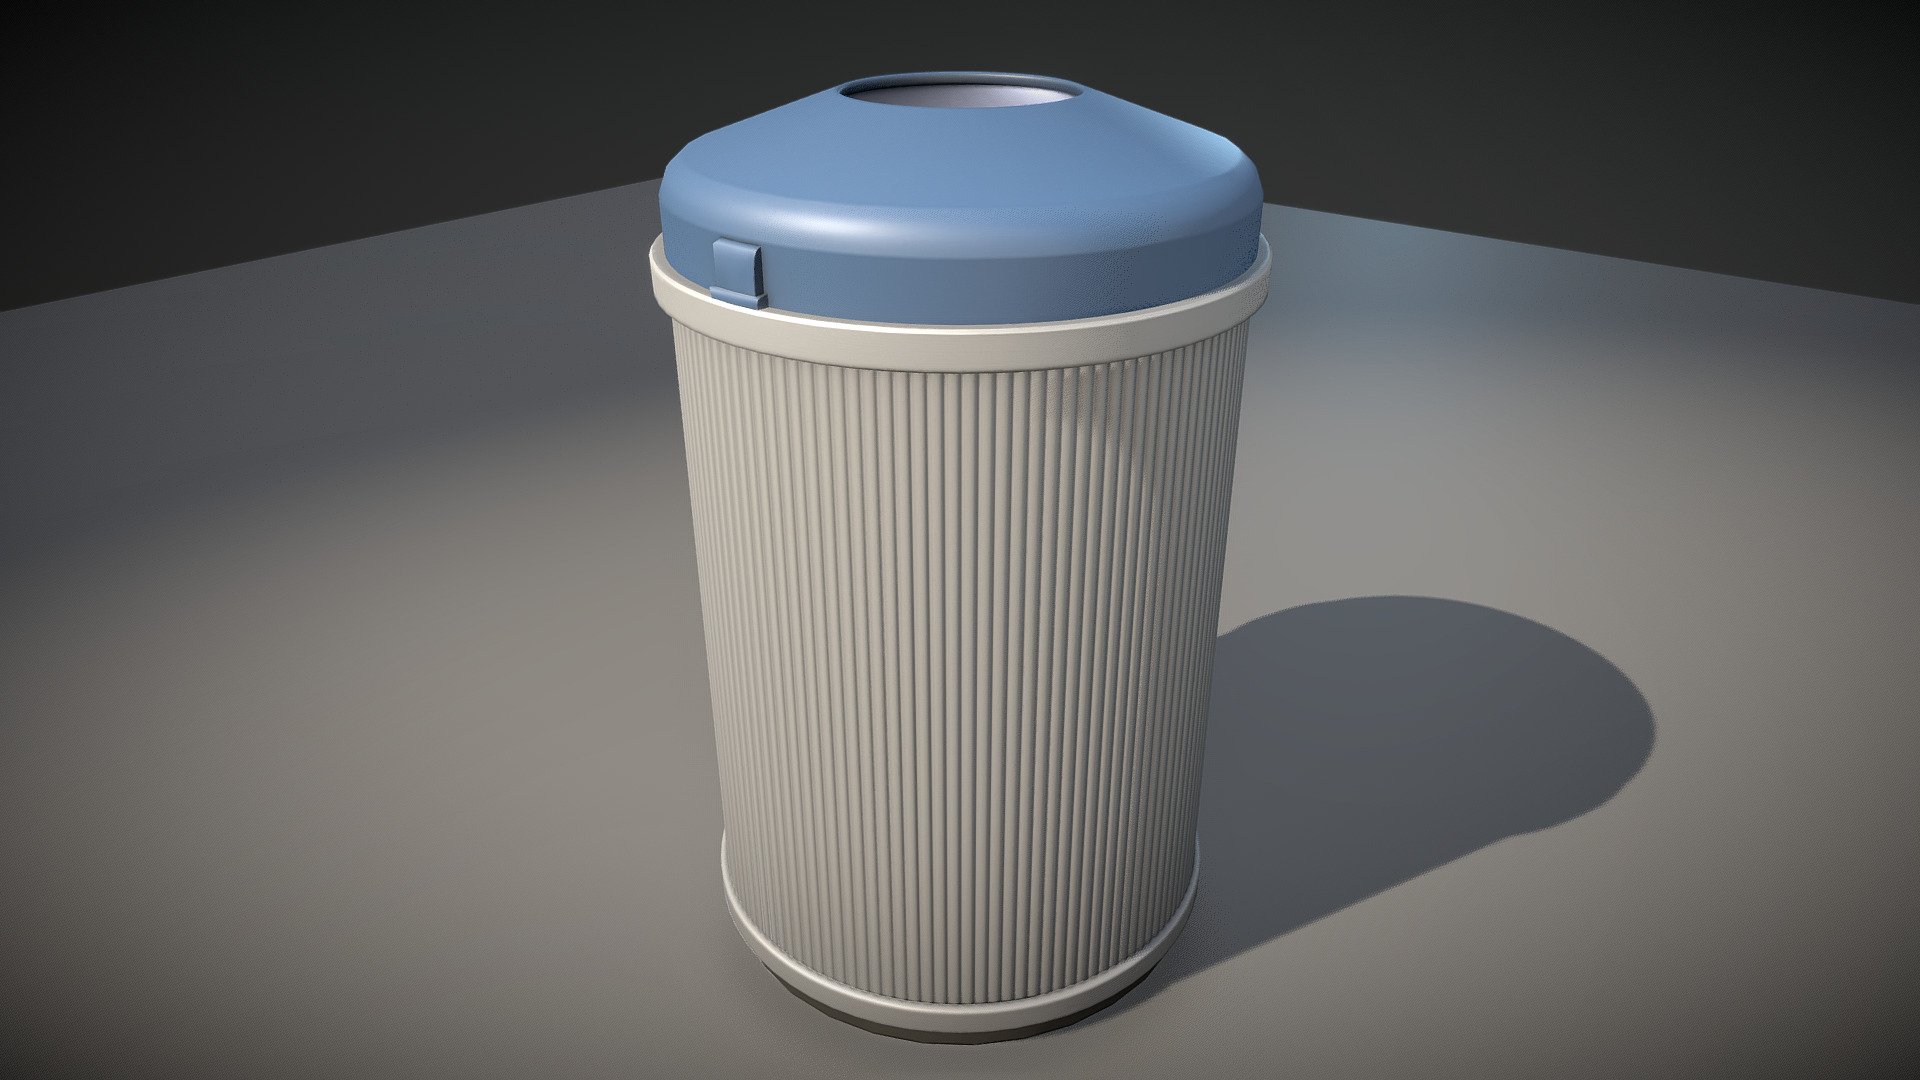 The low-poly version of the blue-white City Trash Can.






Object Dimensions -  0.540m x 0.540m x 0.850m

Vertices = 1050

Polygons = 1168

3D model formats: 




Native format (*.blend)

Autodesk FBX (.fbx)

OBJ (.obj, .mtl)

glTF (.gltf, .glb)

X3D (.x3d)

Collada (.dae)

Stereolithography (.stl)

Polygon File Format (.ply)

Alembic (.abc)

DXF (.dxf)

USDC









 - City Trash Can (plastic-blue-white) | Low-Poly - Buy Royalty Free 3D model by VIS-All-3D (@VIS-All) 3d model